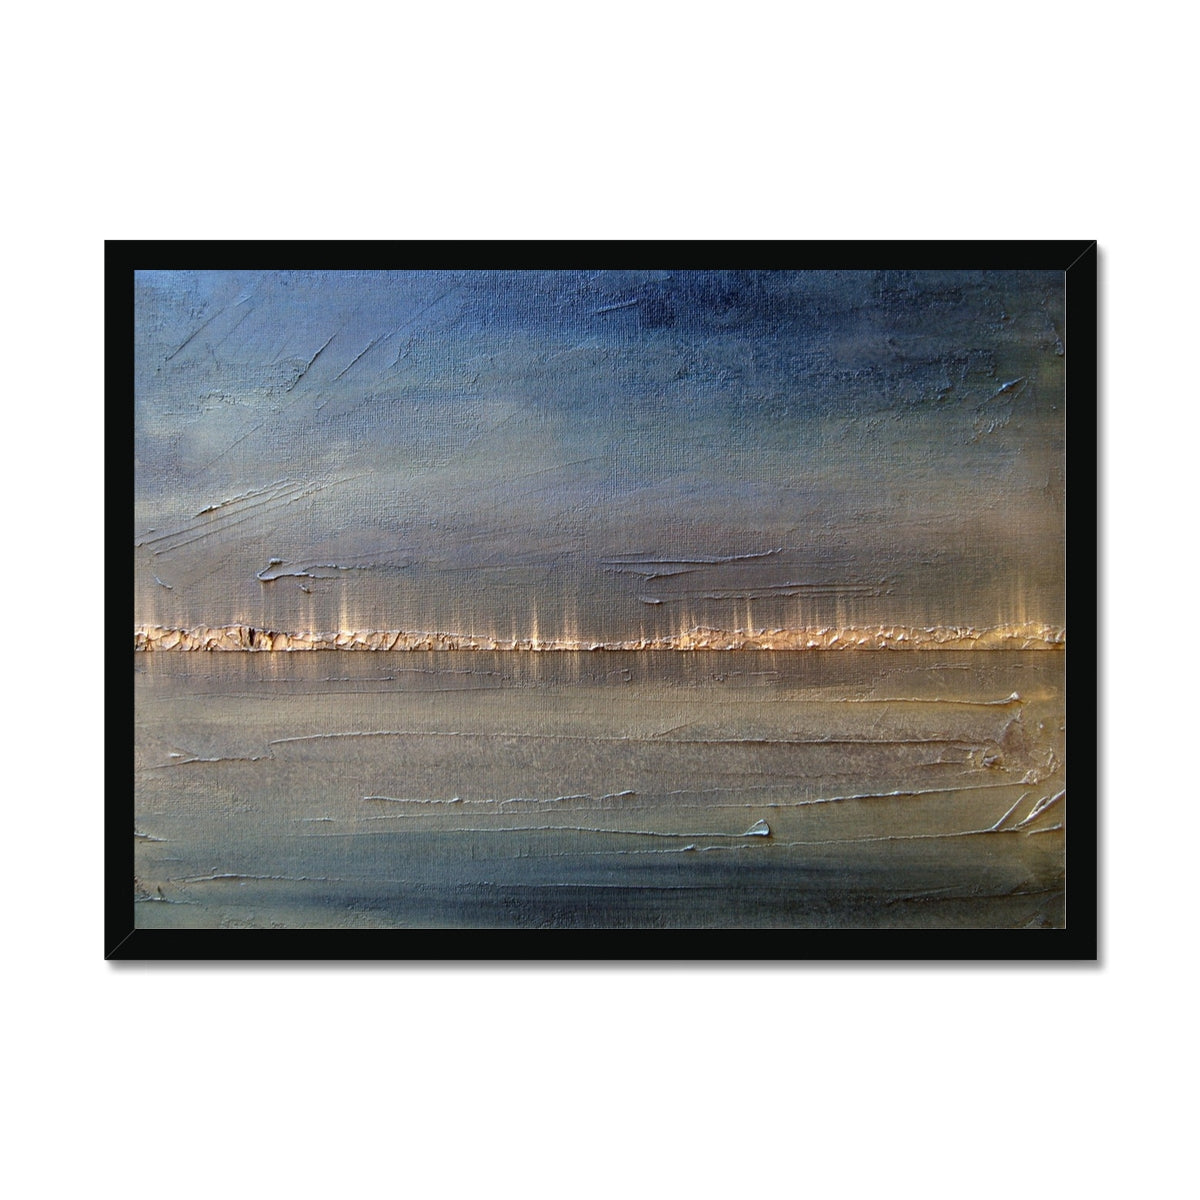 Distant Lights Lake Ontario Painting | Framed Prints From Scotland-Framed Prints-World Art Gallery-A2 Landscape-Black Frame-Paintings, Prints, Homeware, Art Gifts From Scotland By Scottish Artist Kevin Hunter